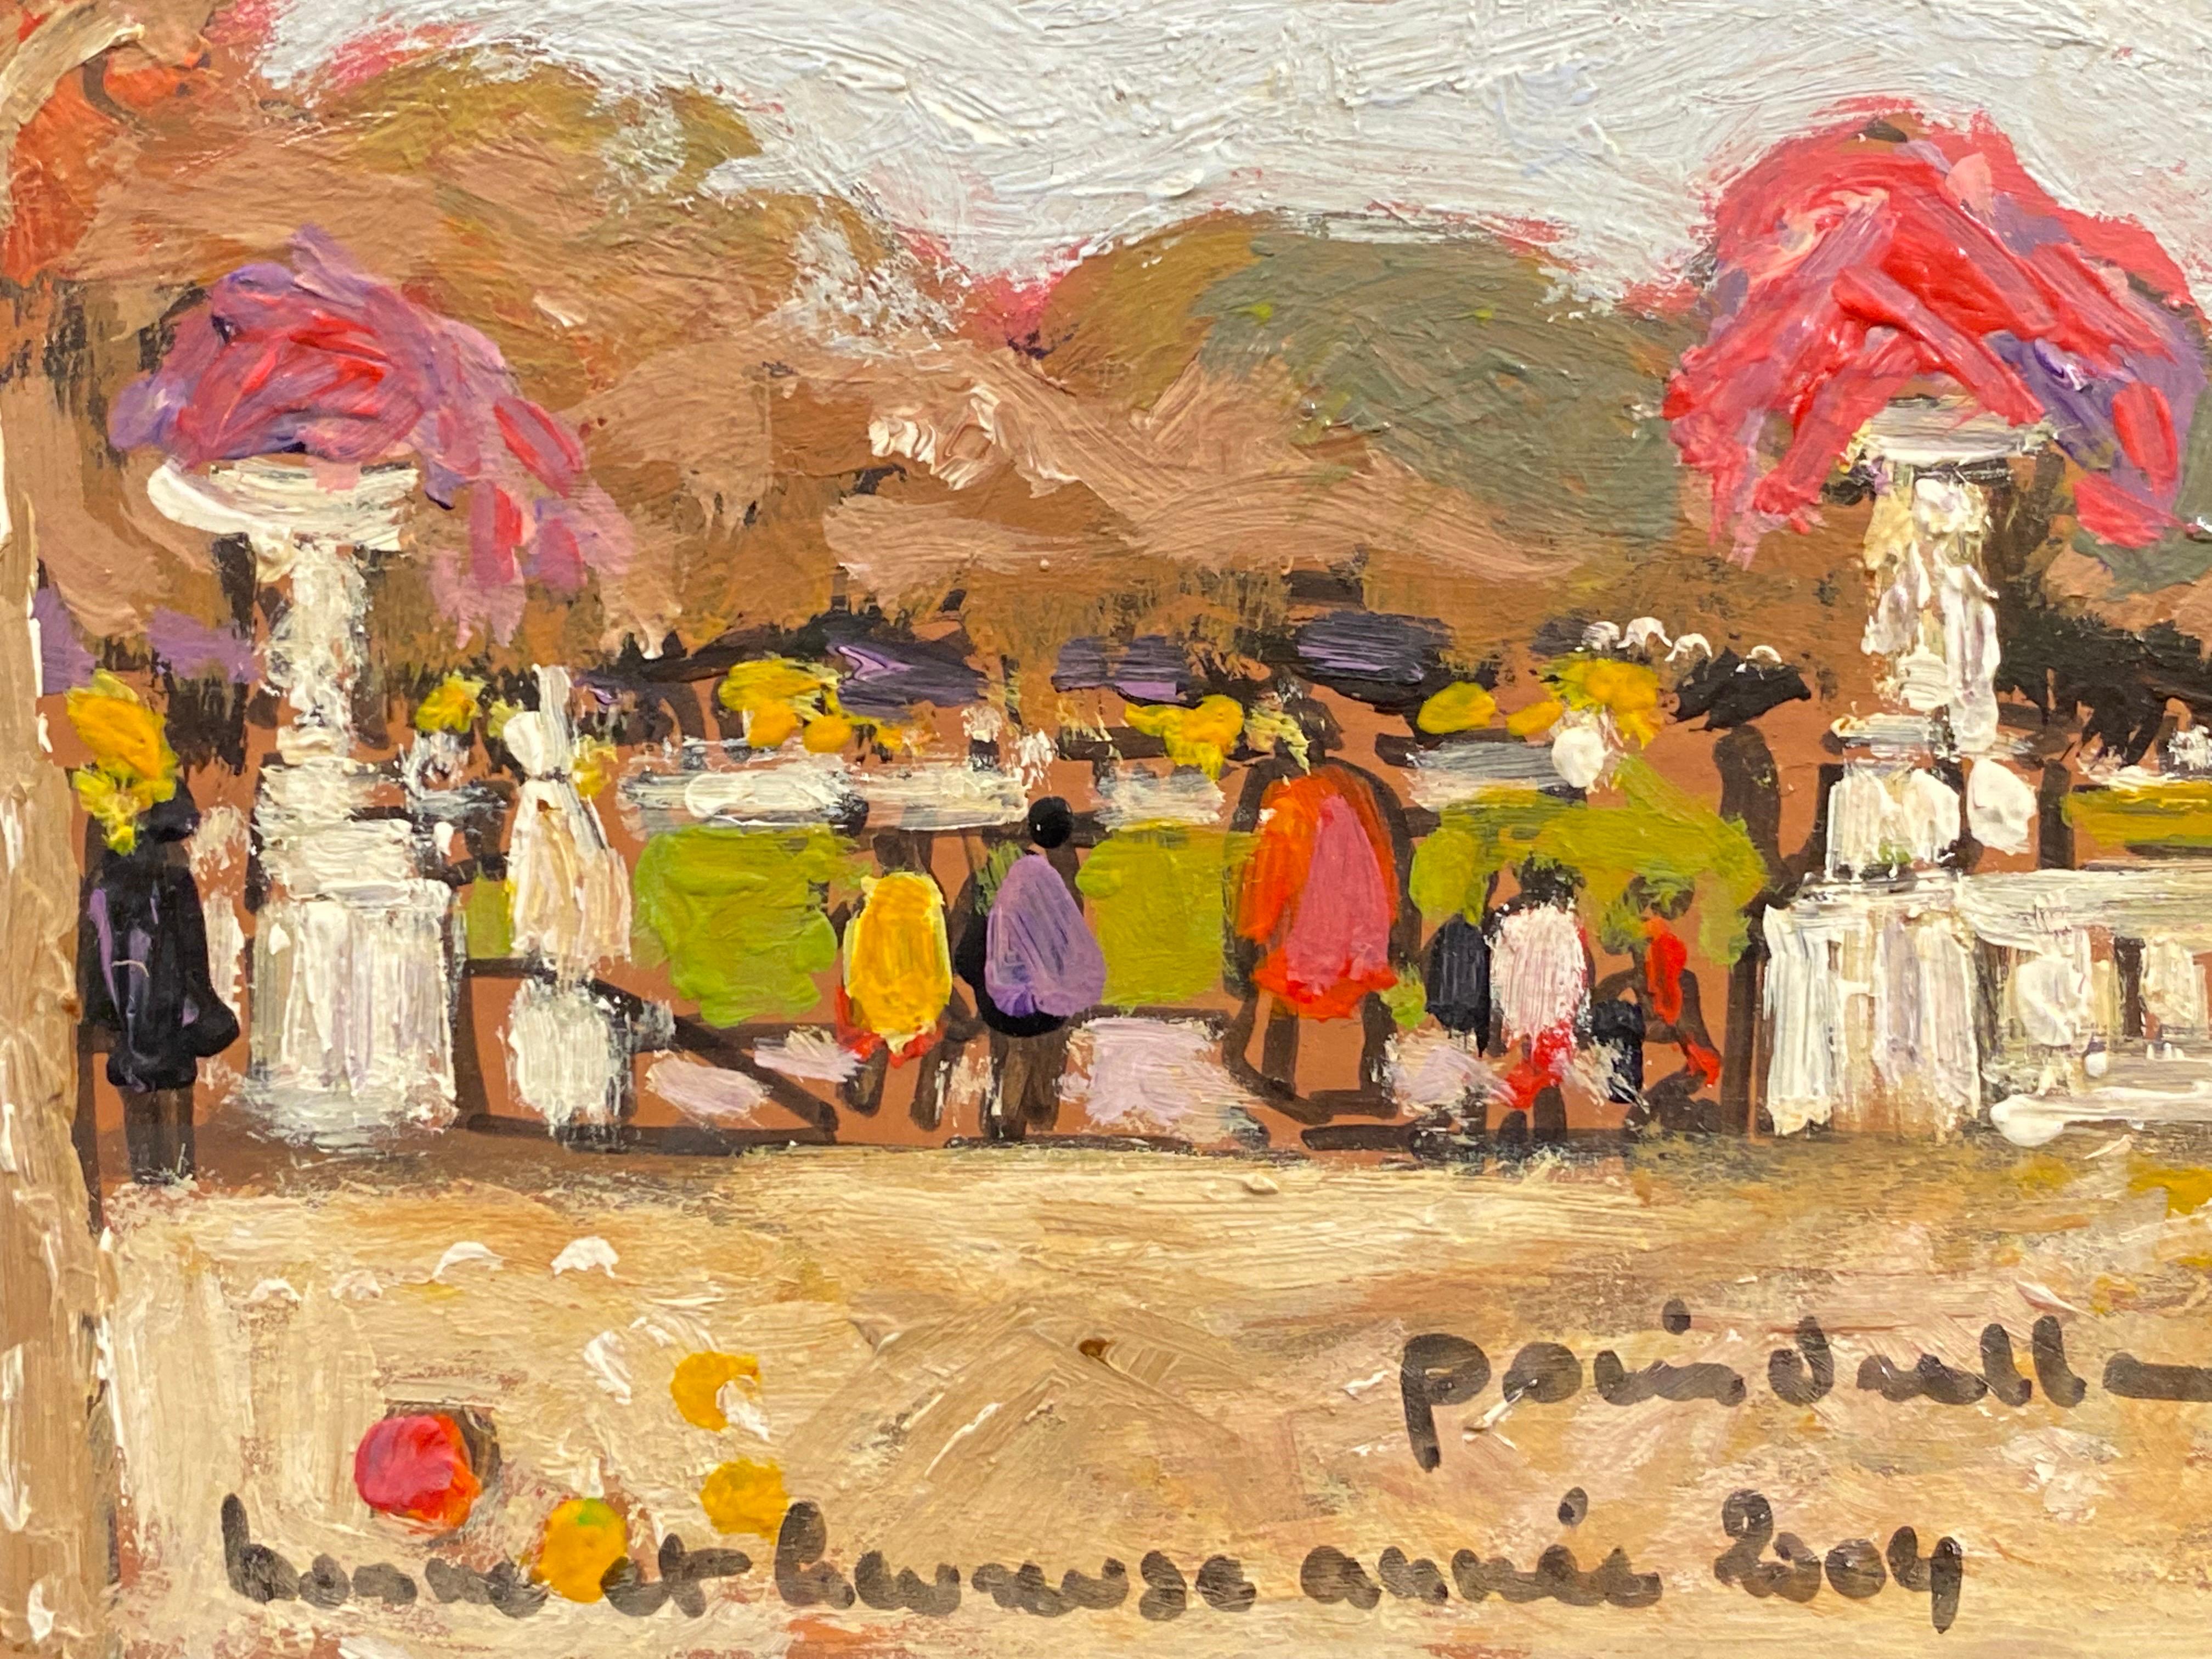 Artist/ School: Patrice Poindrelle (French b. 1954), signed on front and back, inscribed verso, dated 2004.

Title: Jardins des Tulieries, Paris

Medium: oil painting on board, unframed.

Size:  painting: 4 x 7 inches     

Provenance: private